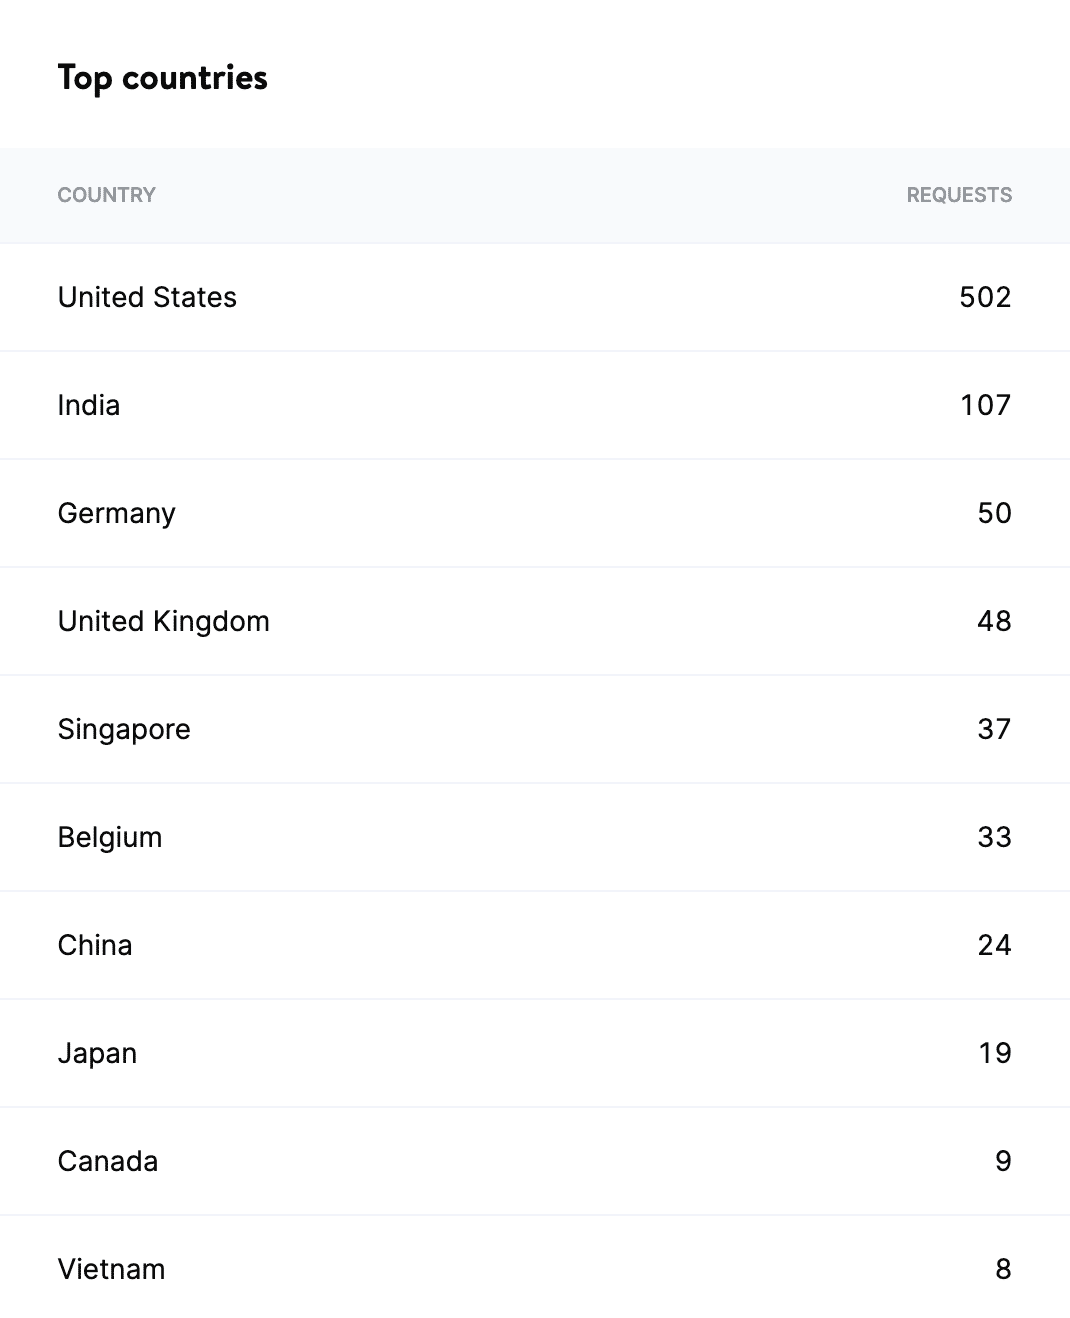 Top countries list.